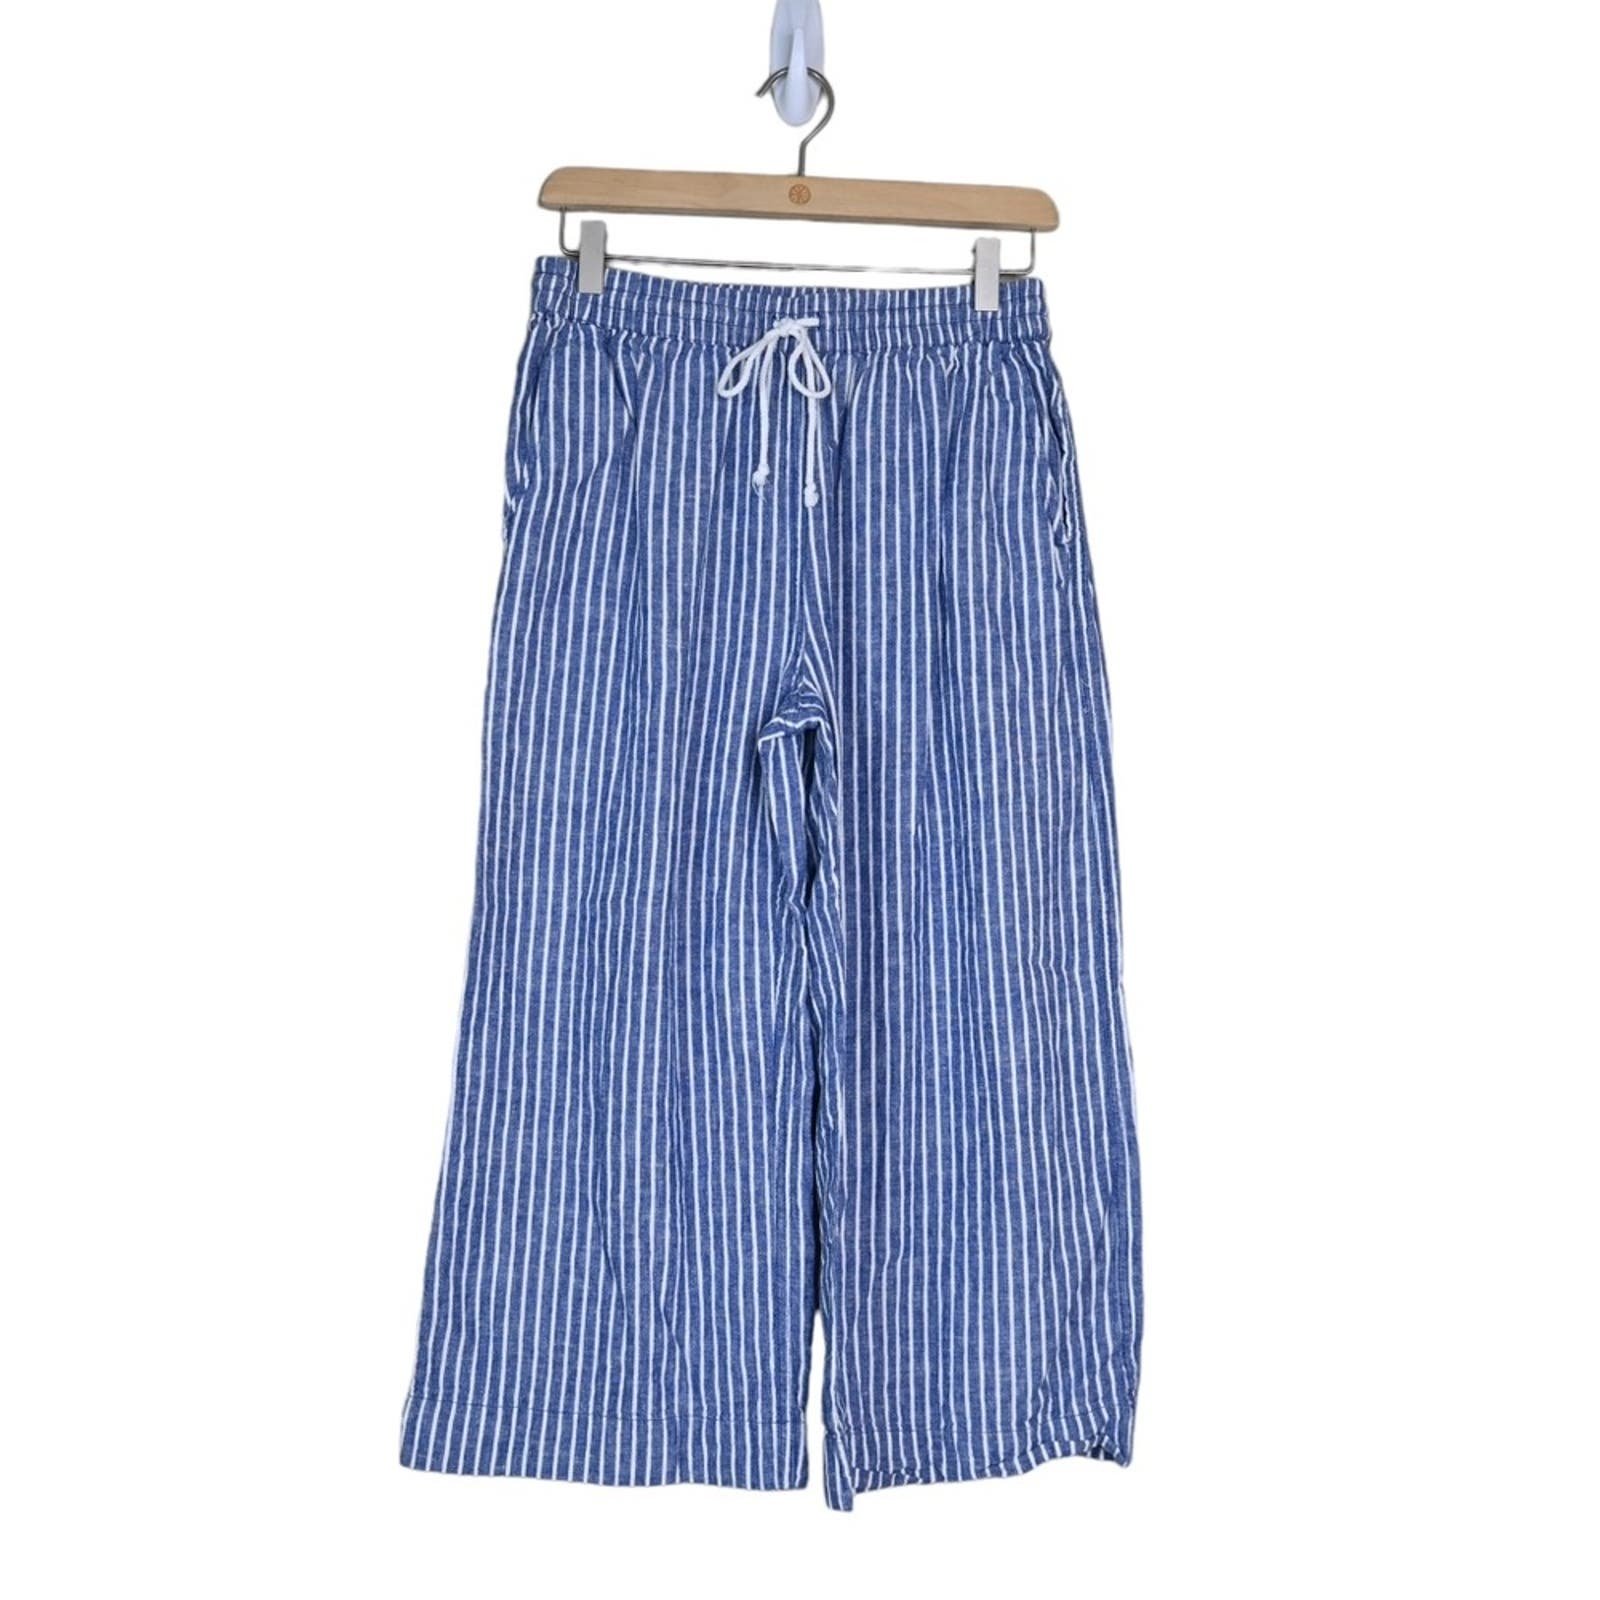 Discounted Beachlunchlounge Womens S Margot Drawstring Striped Linen Blend Pants mKvt7Eqgy Outlet Store